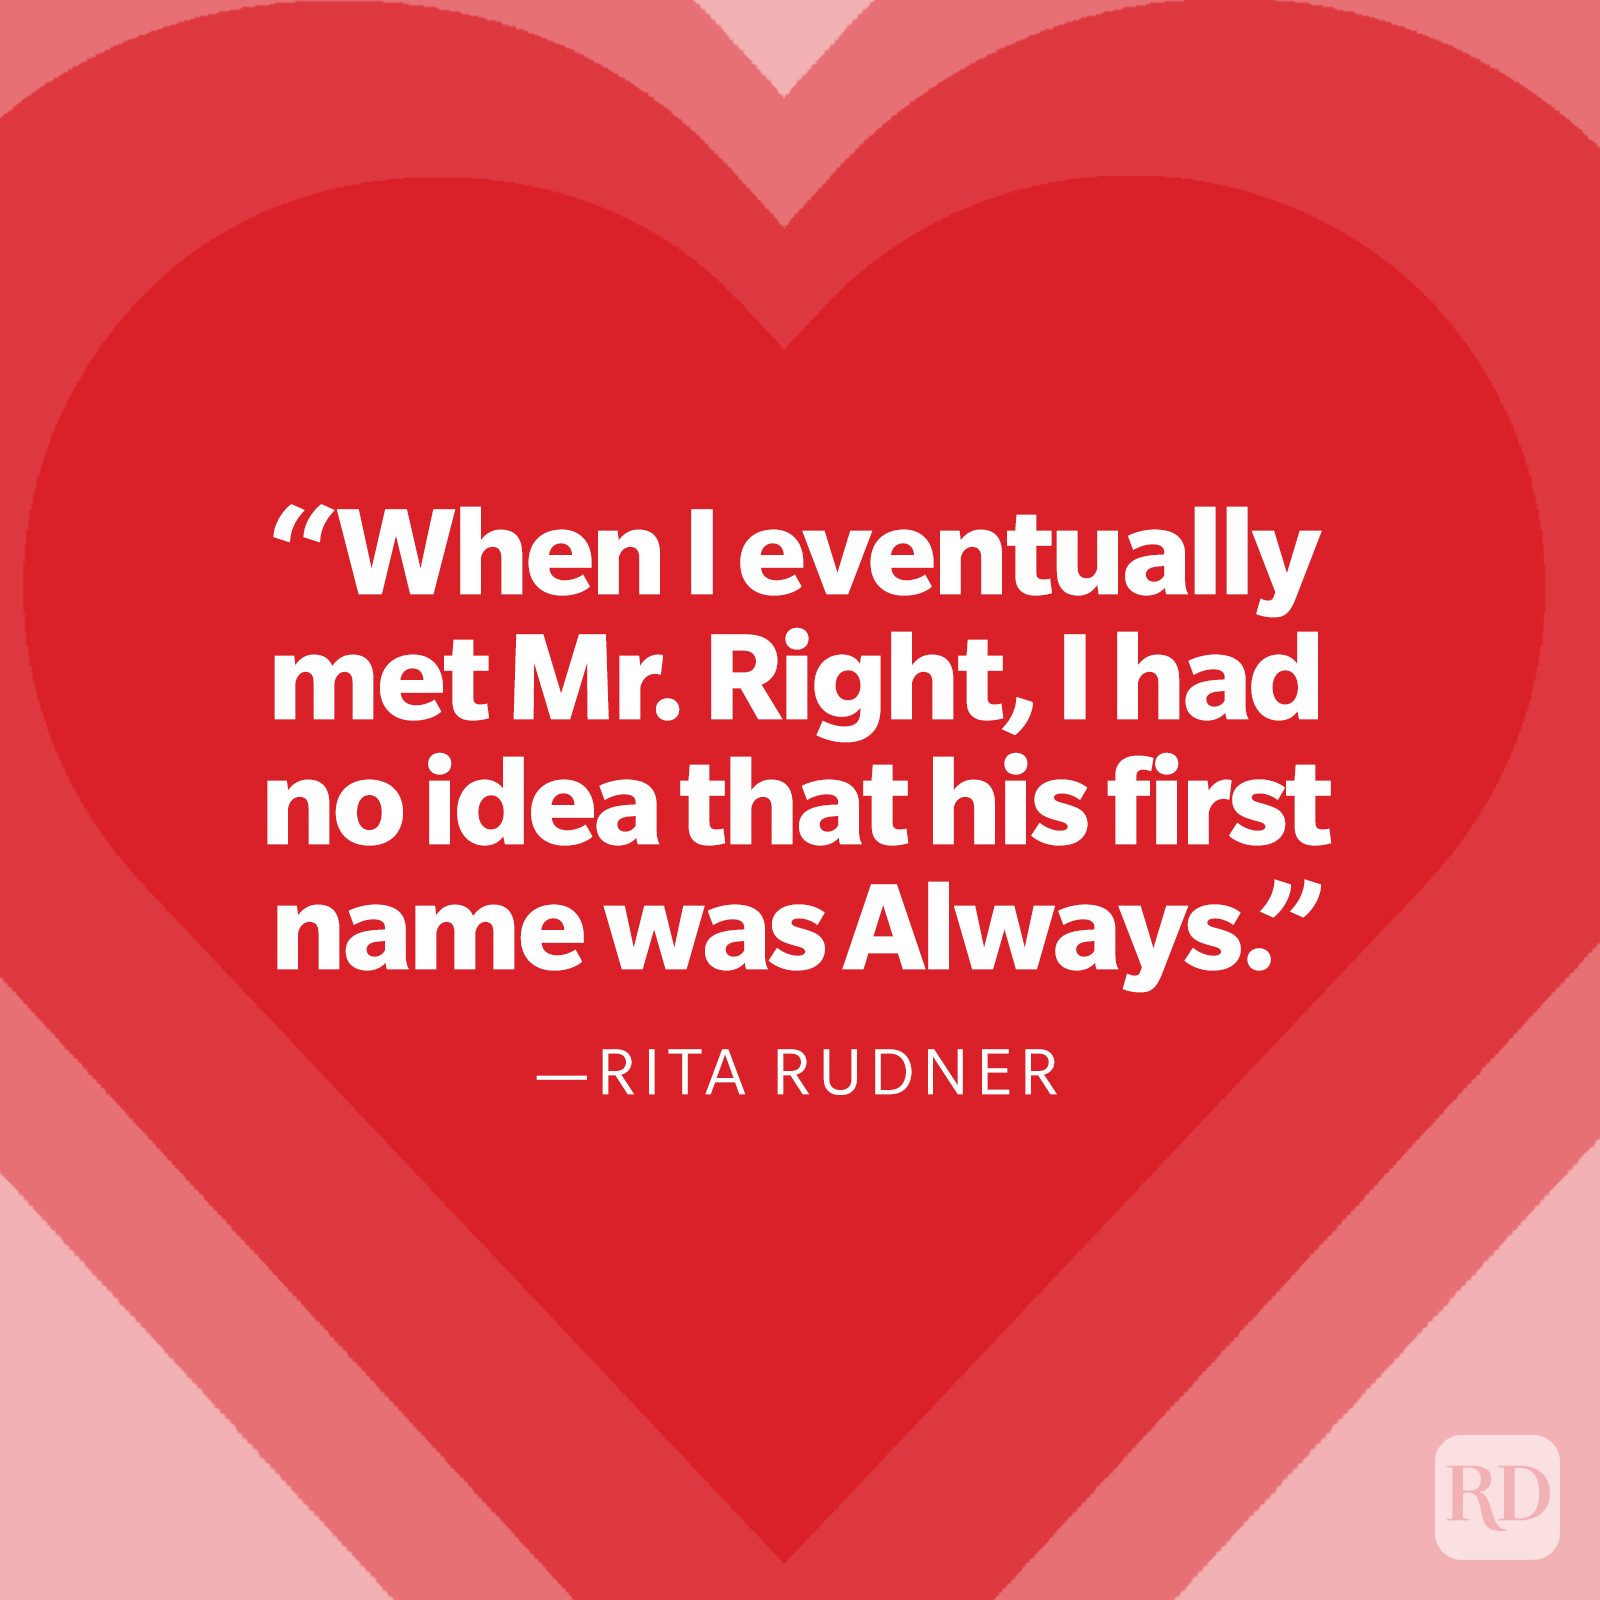 55 Funny Valentine's Day Quotes to Share with Your Love in 2023